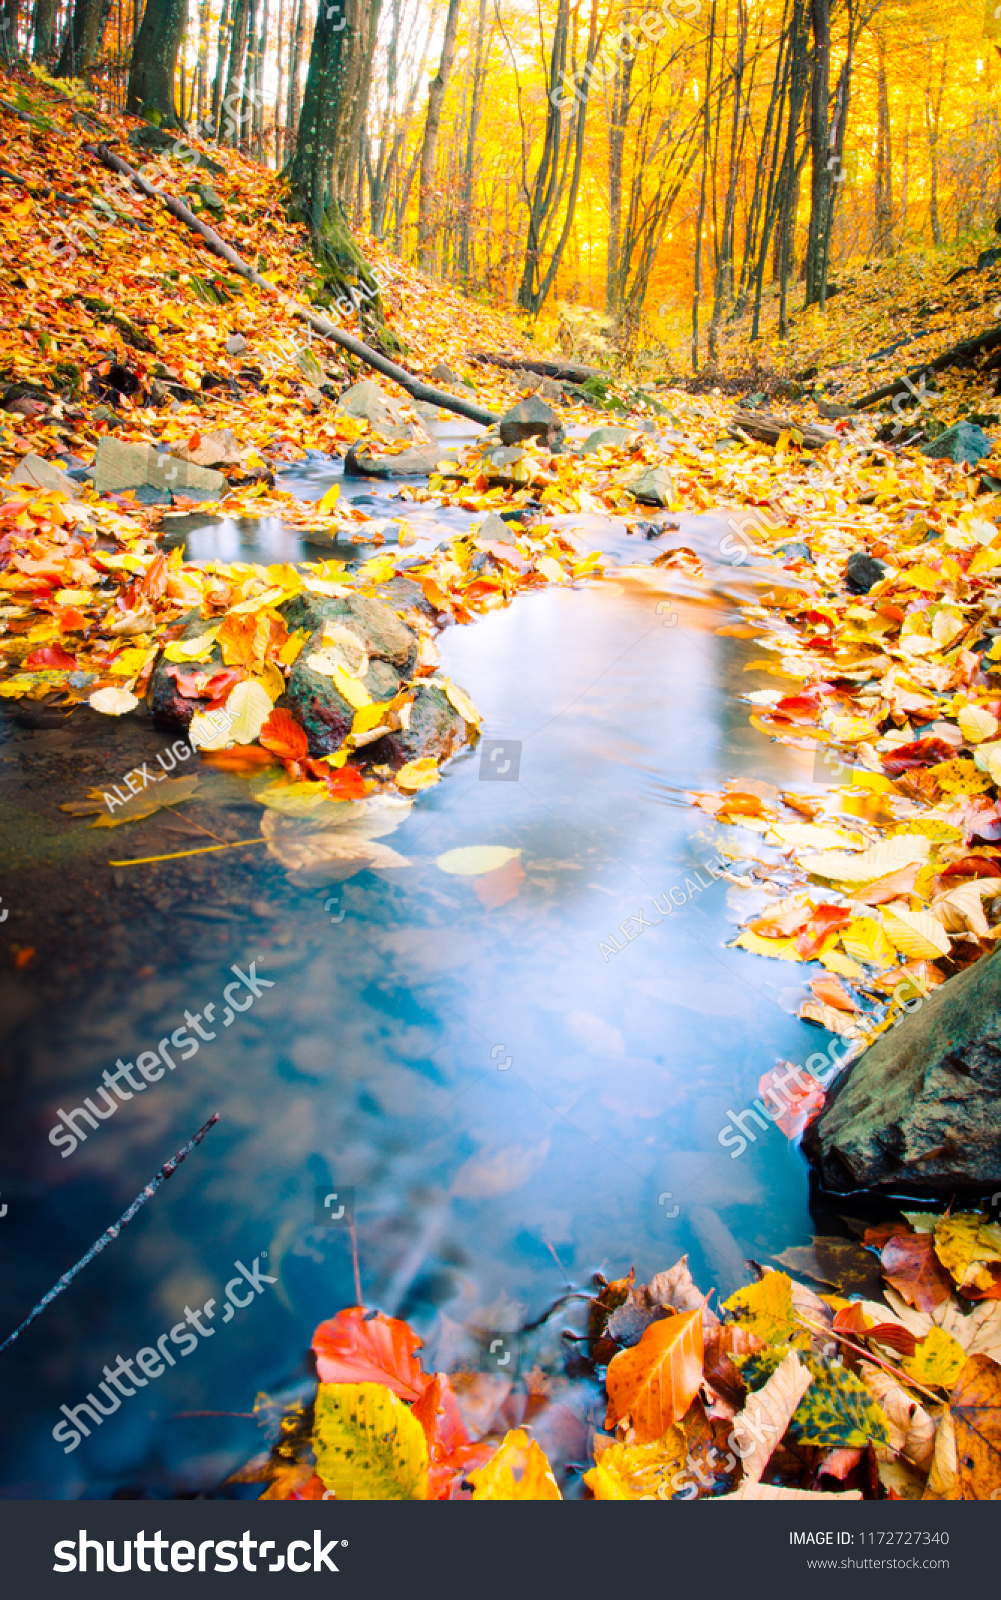 Fall nature. Autumn forest with foliage. Stream in forest. #1172727340